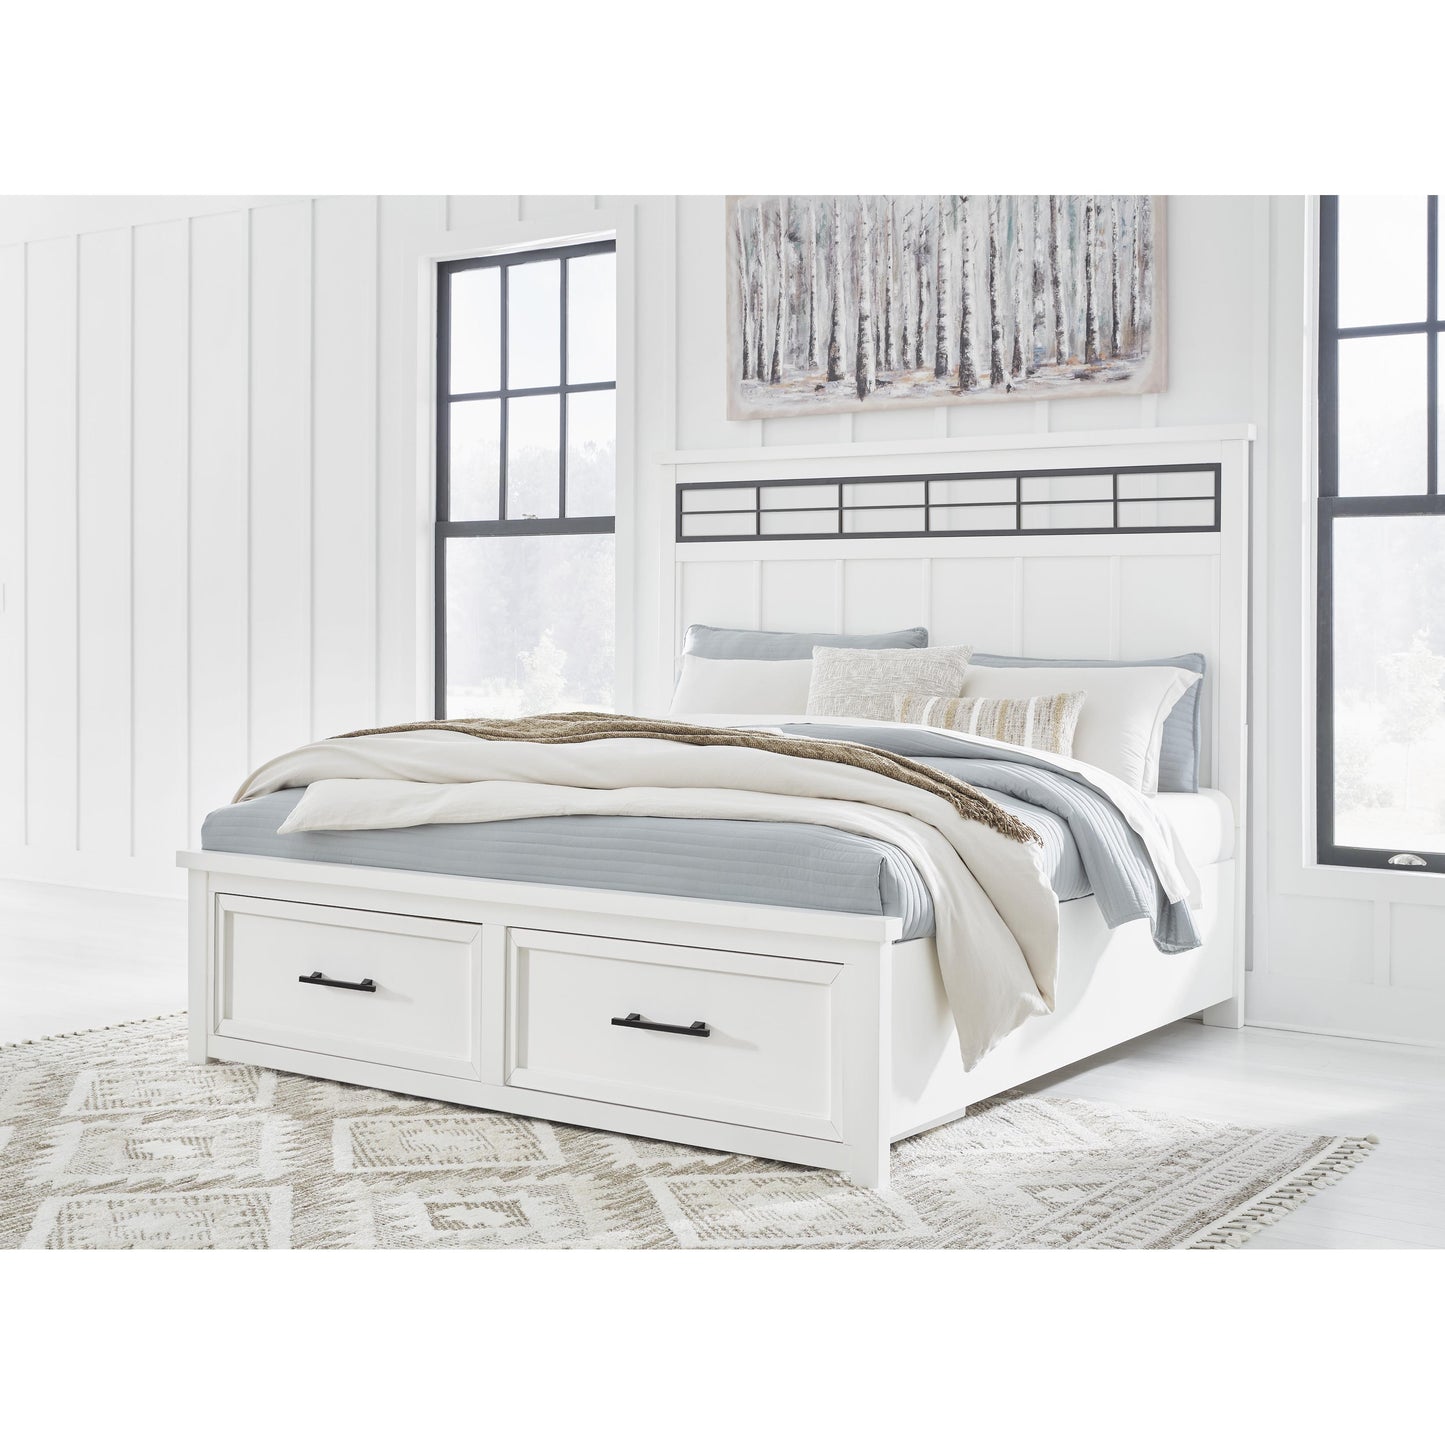 Signature Design by Ashley Ashbryn California King Panel Bed with Storage B844-58/B844-56S/B844-94 IMAGE 1